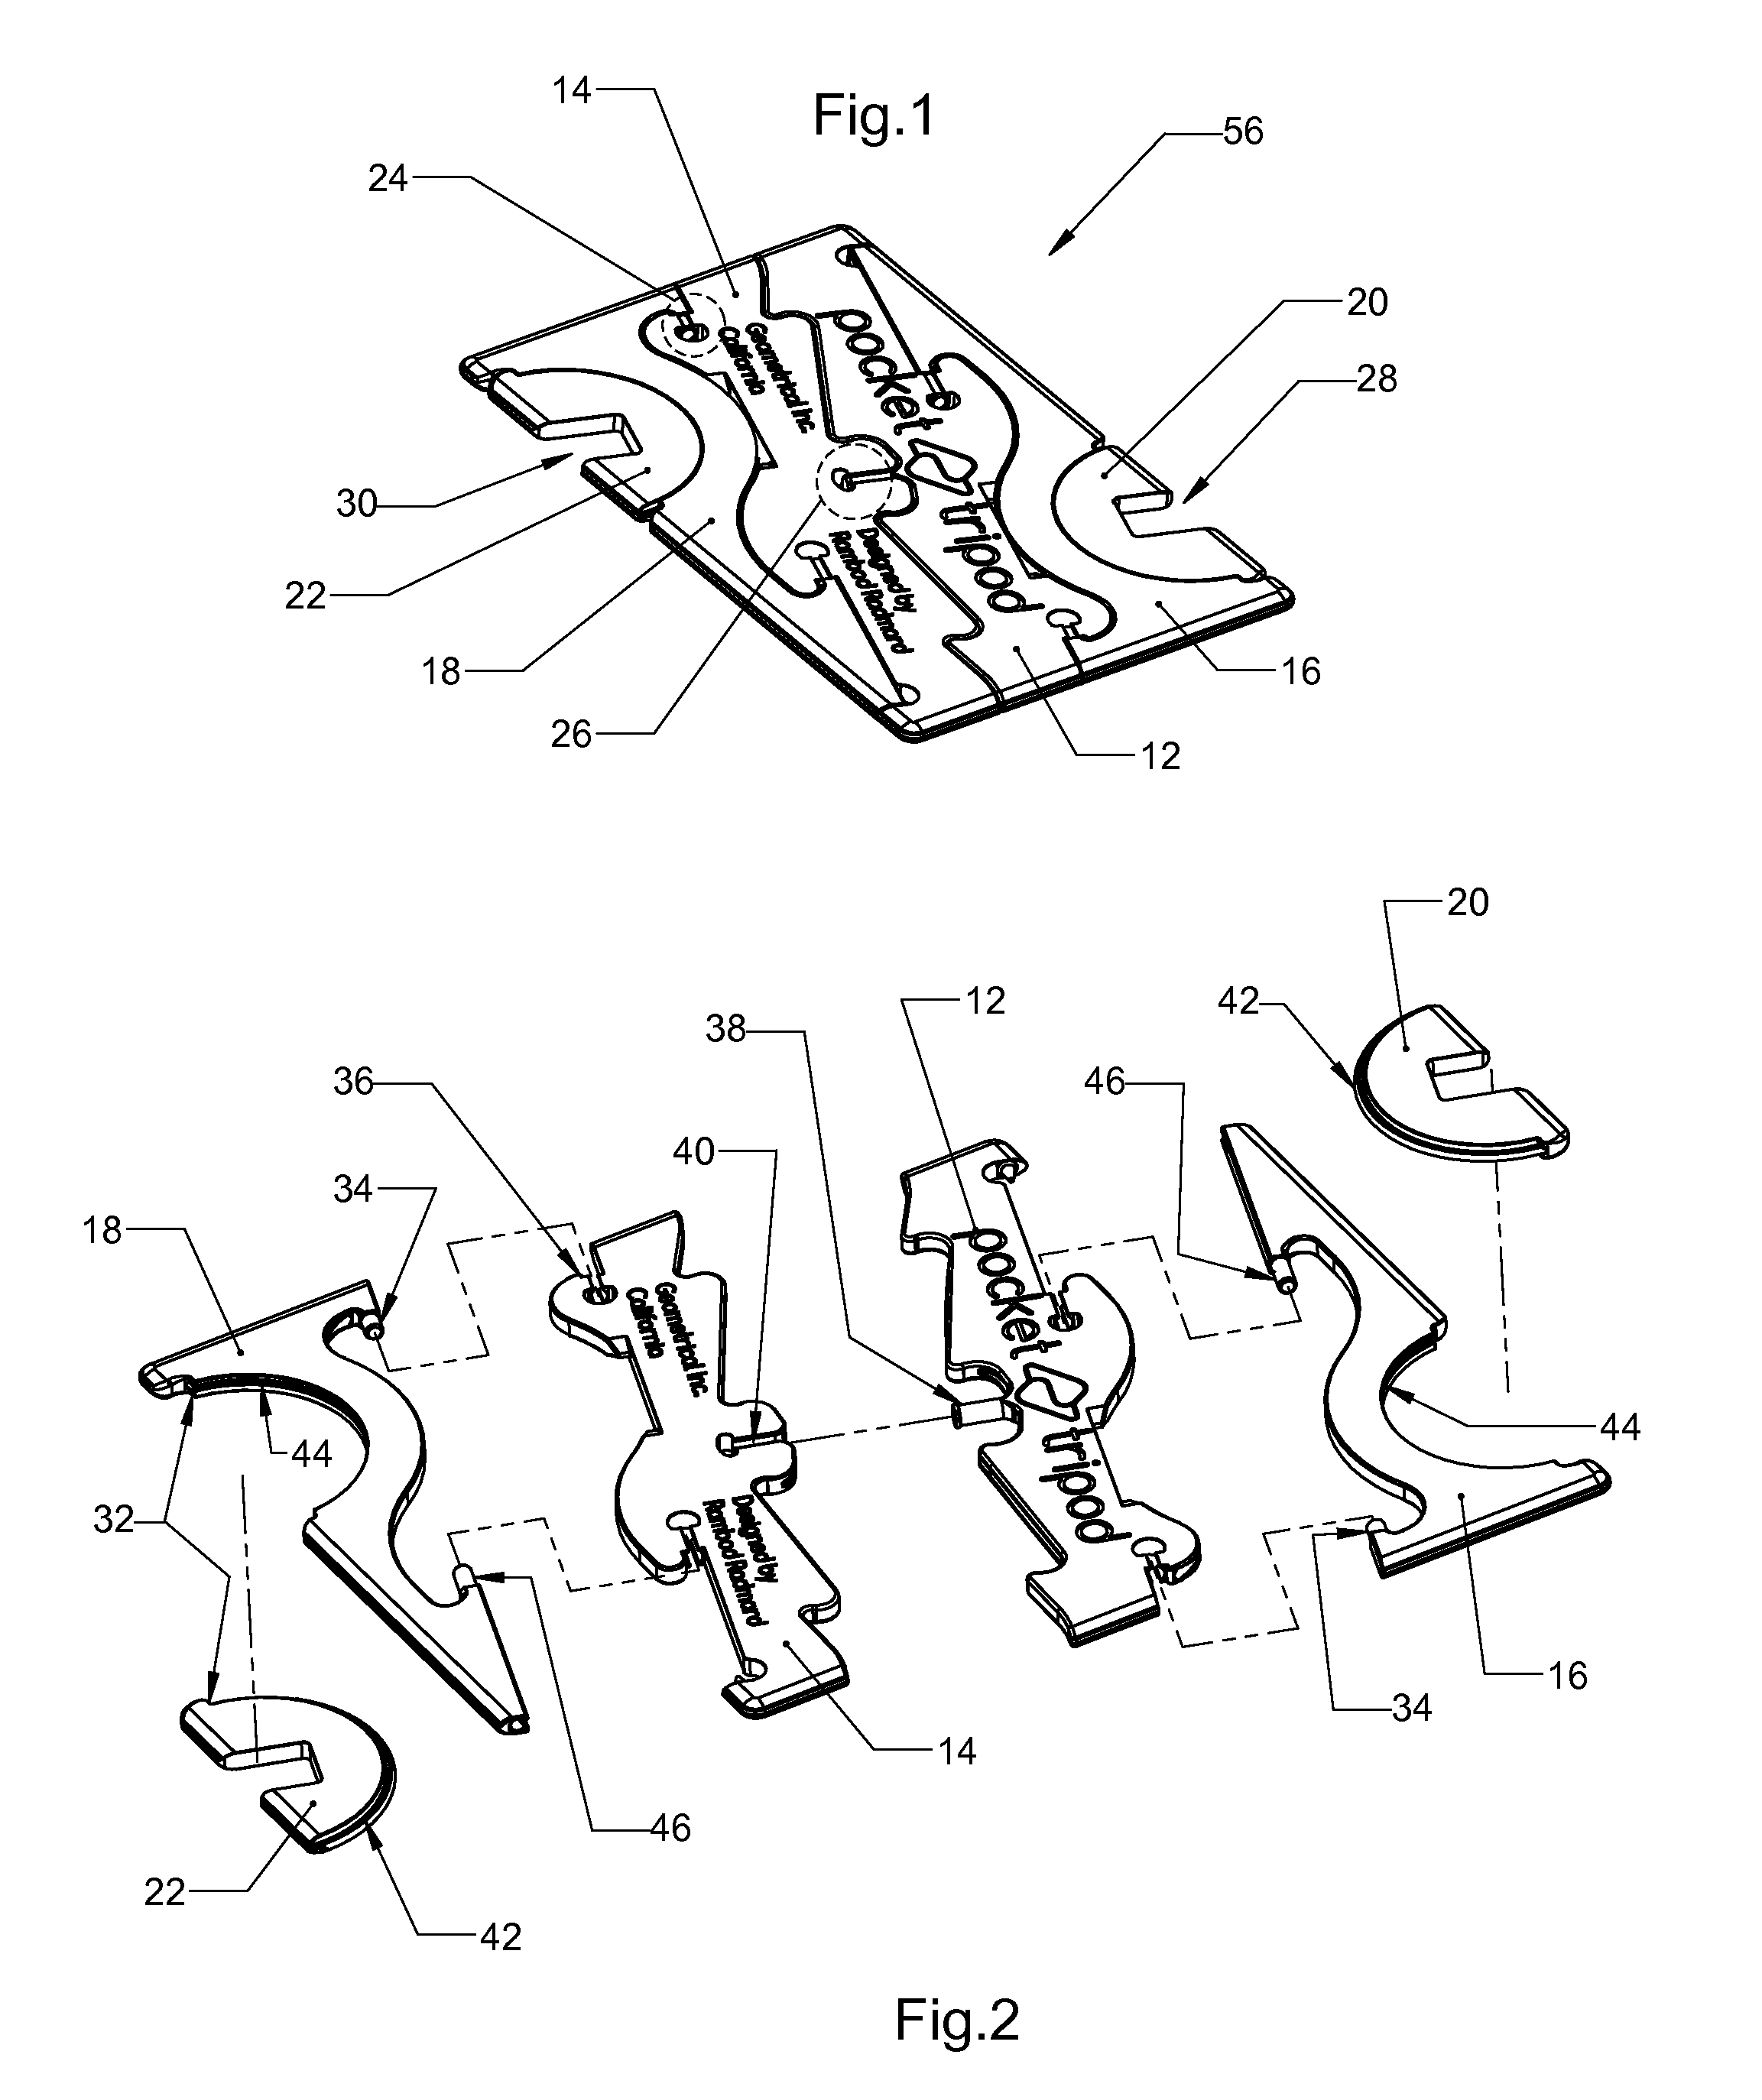 Apparatus to support portable electronic devices and other devices or objects